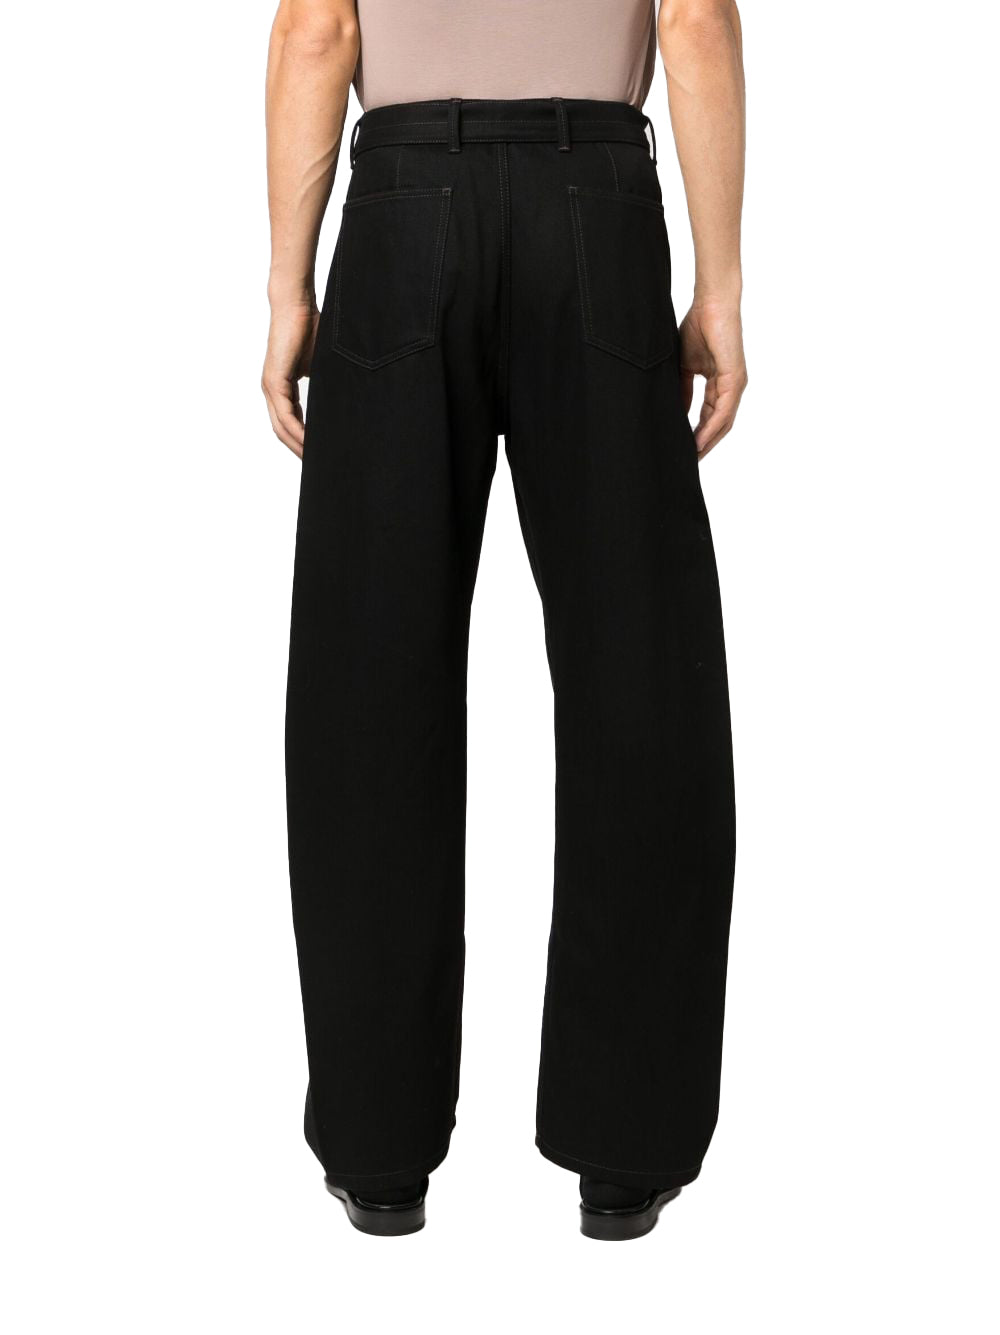 Twisted Belted Neri trousers